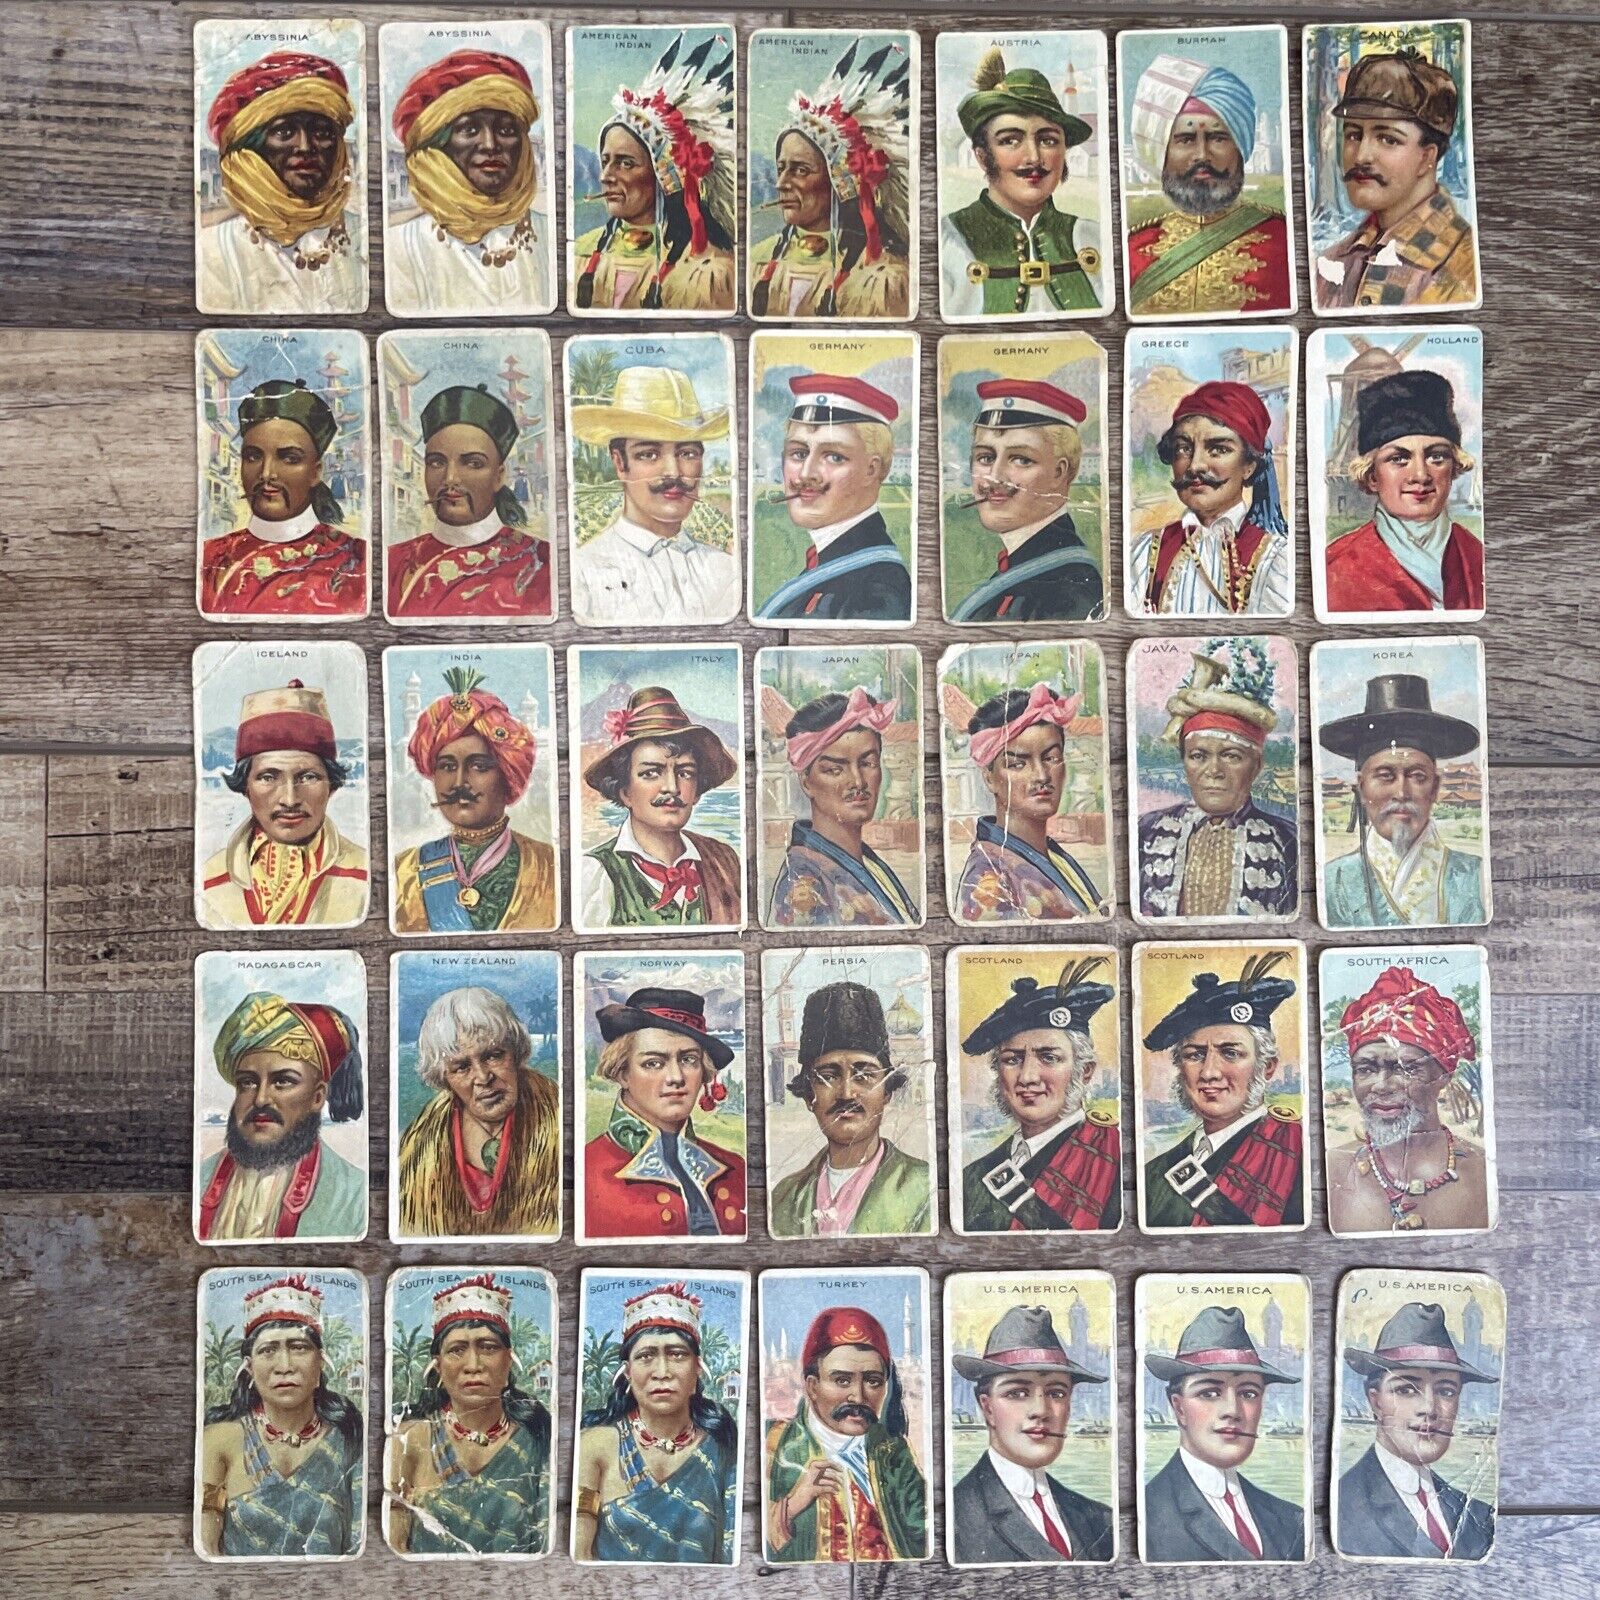 1911 AMERICAN TOBACCO COMPANY TYPES OF NATIONS T113 LOT OF 35 TRADING CARDS